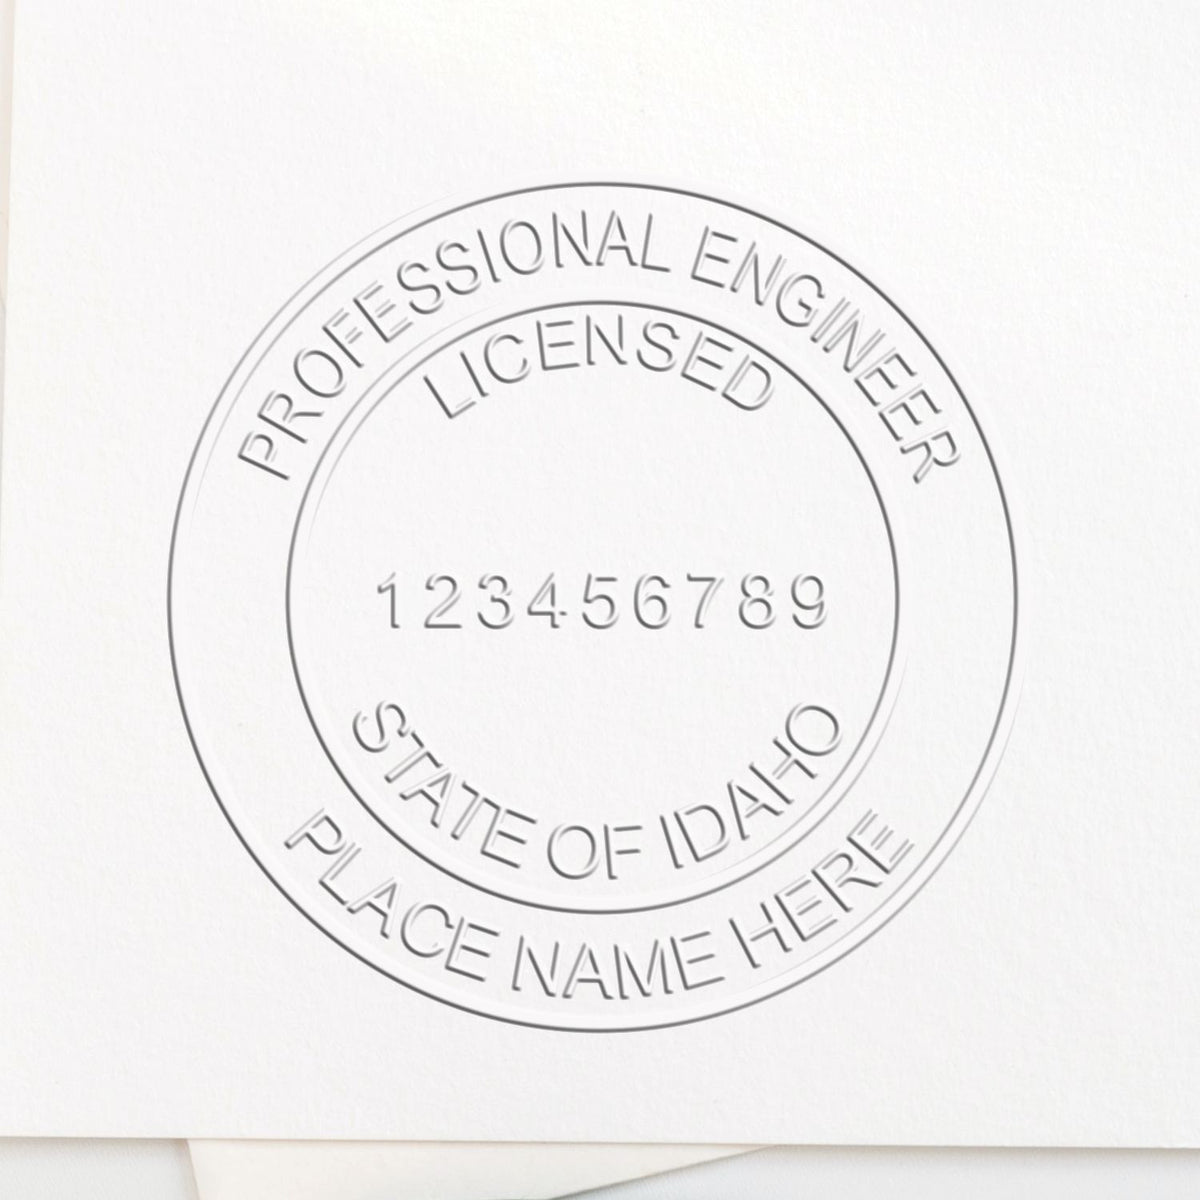 A stamped impression of the Idaho Engineer Desk Seal in this stylish lifestyle photo, setting the tone for a unique and personalized product.